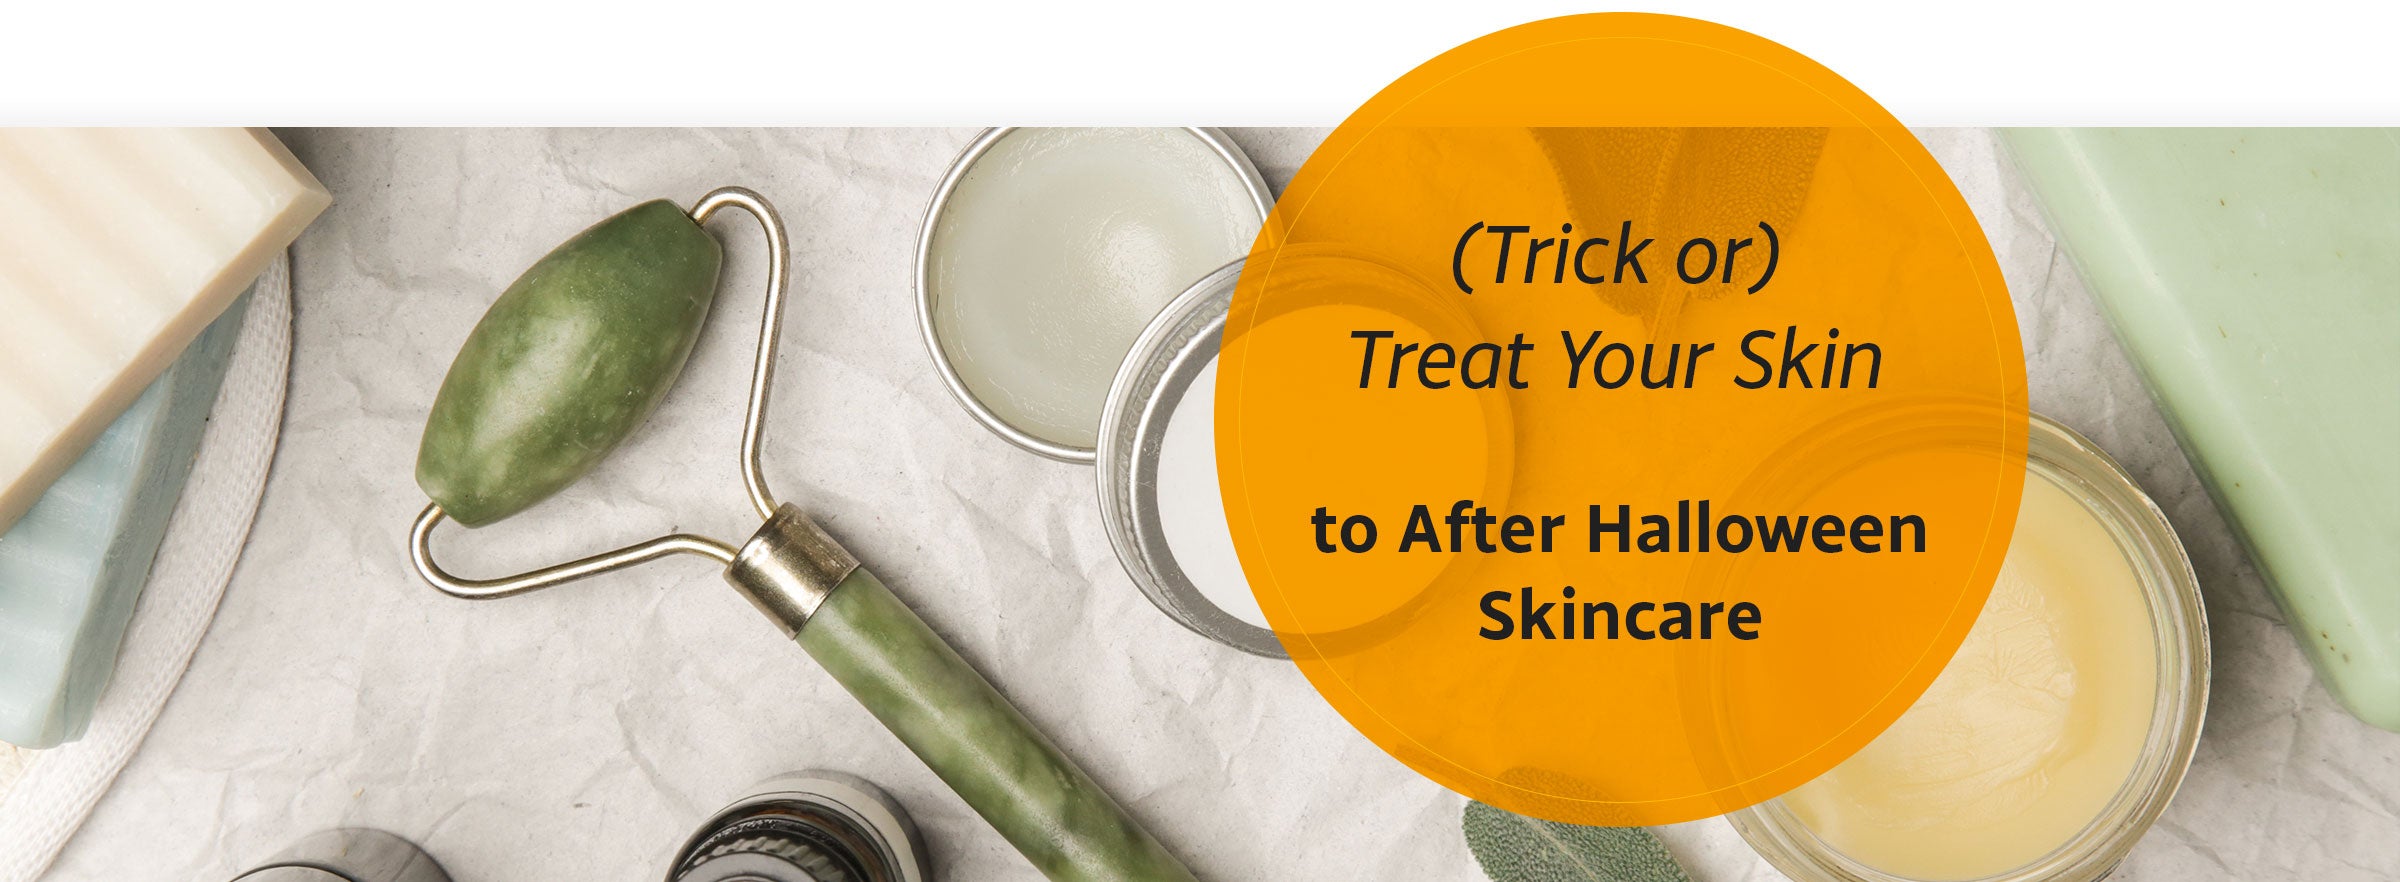 (Trick or) Treat Your Skin to After Halloween Skin Care